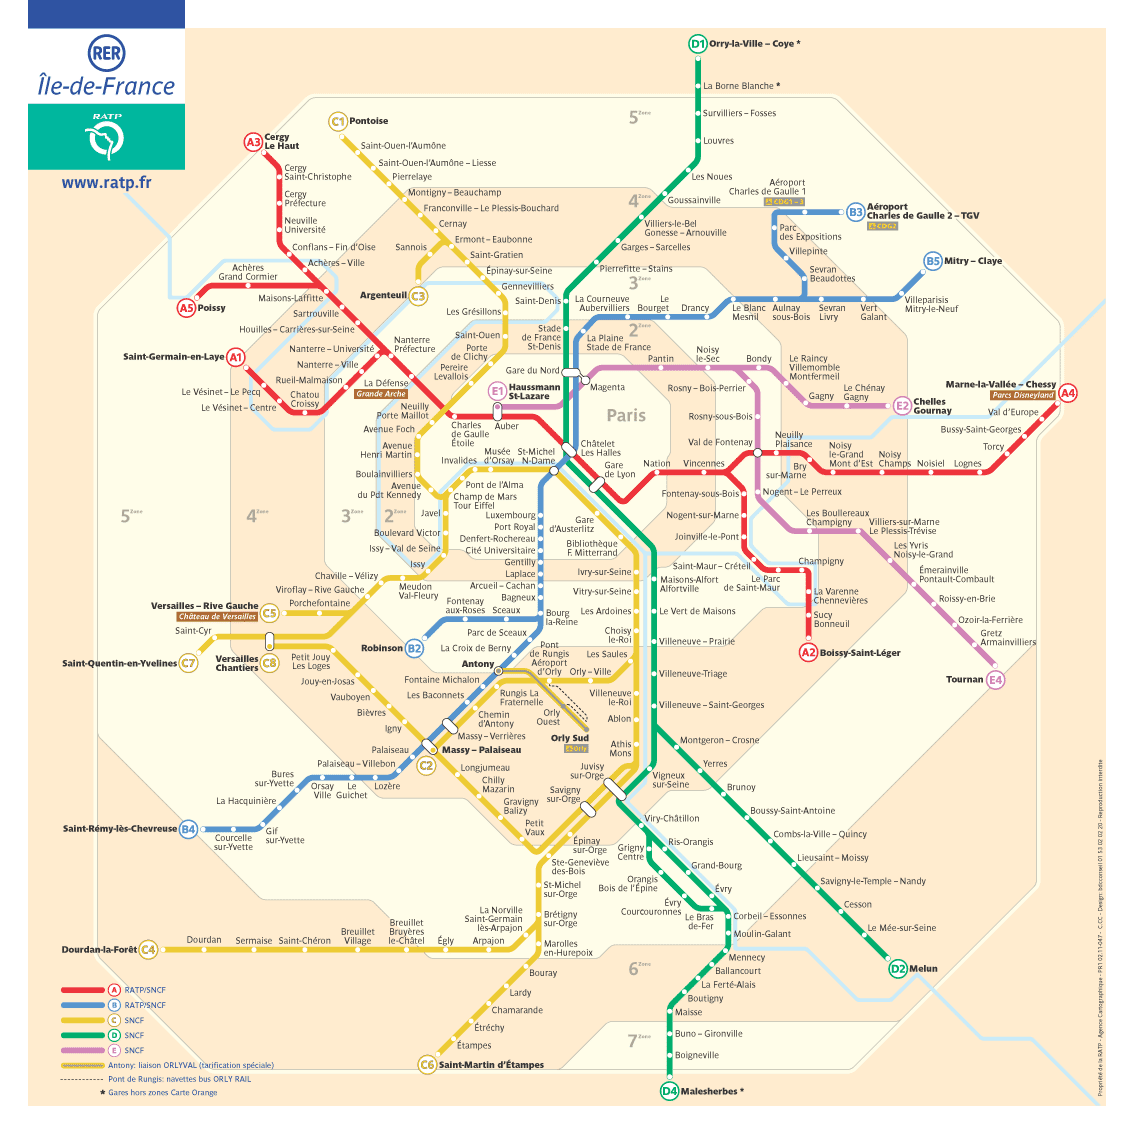 RER map of paris from ratp with all the stations and the direction in paris to go to the marias nad saint-germain des pres, to visit the left bank anf the historical places, to find an apartment for rent in paris.